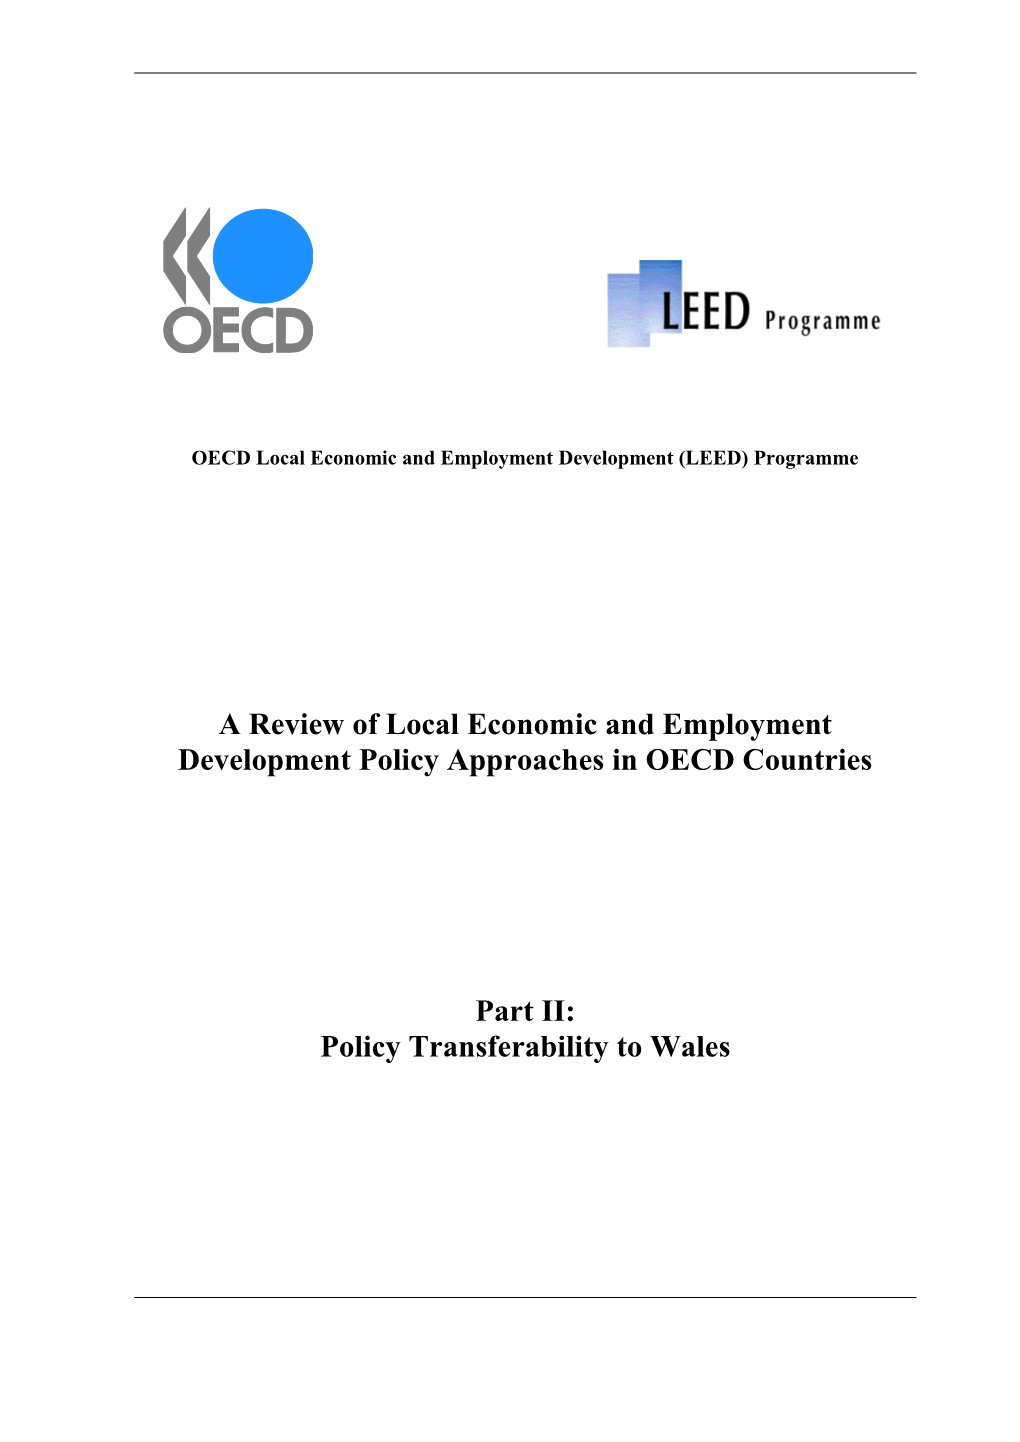 A Review of Local Economic and Employment Development Policy Approaches in OECD Countries